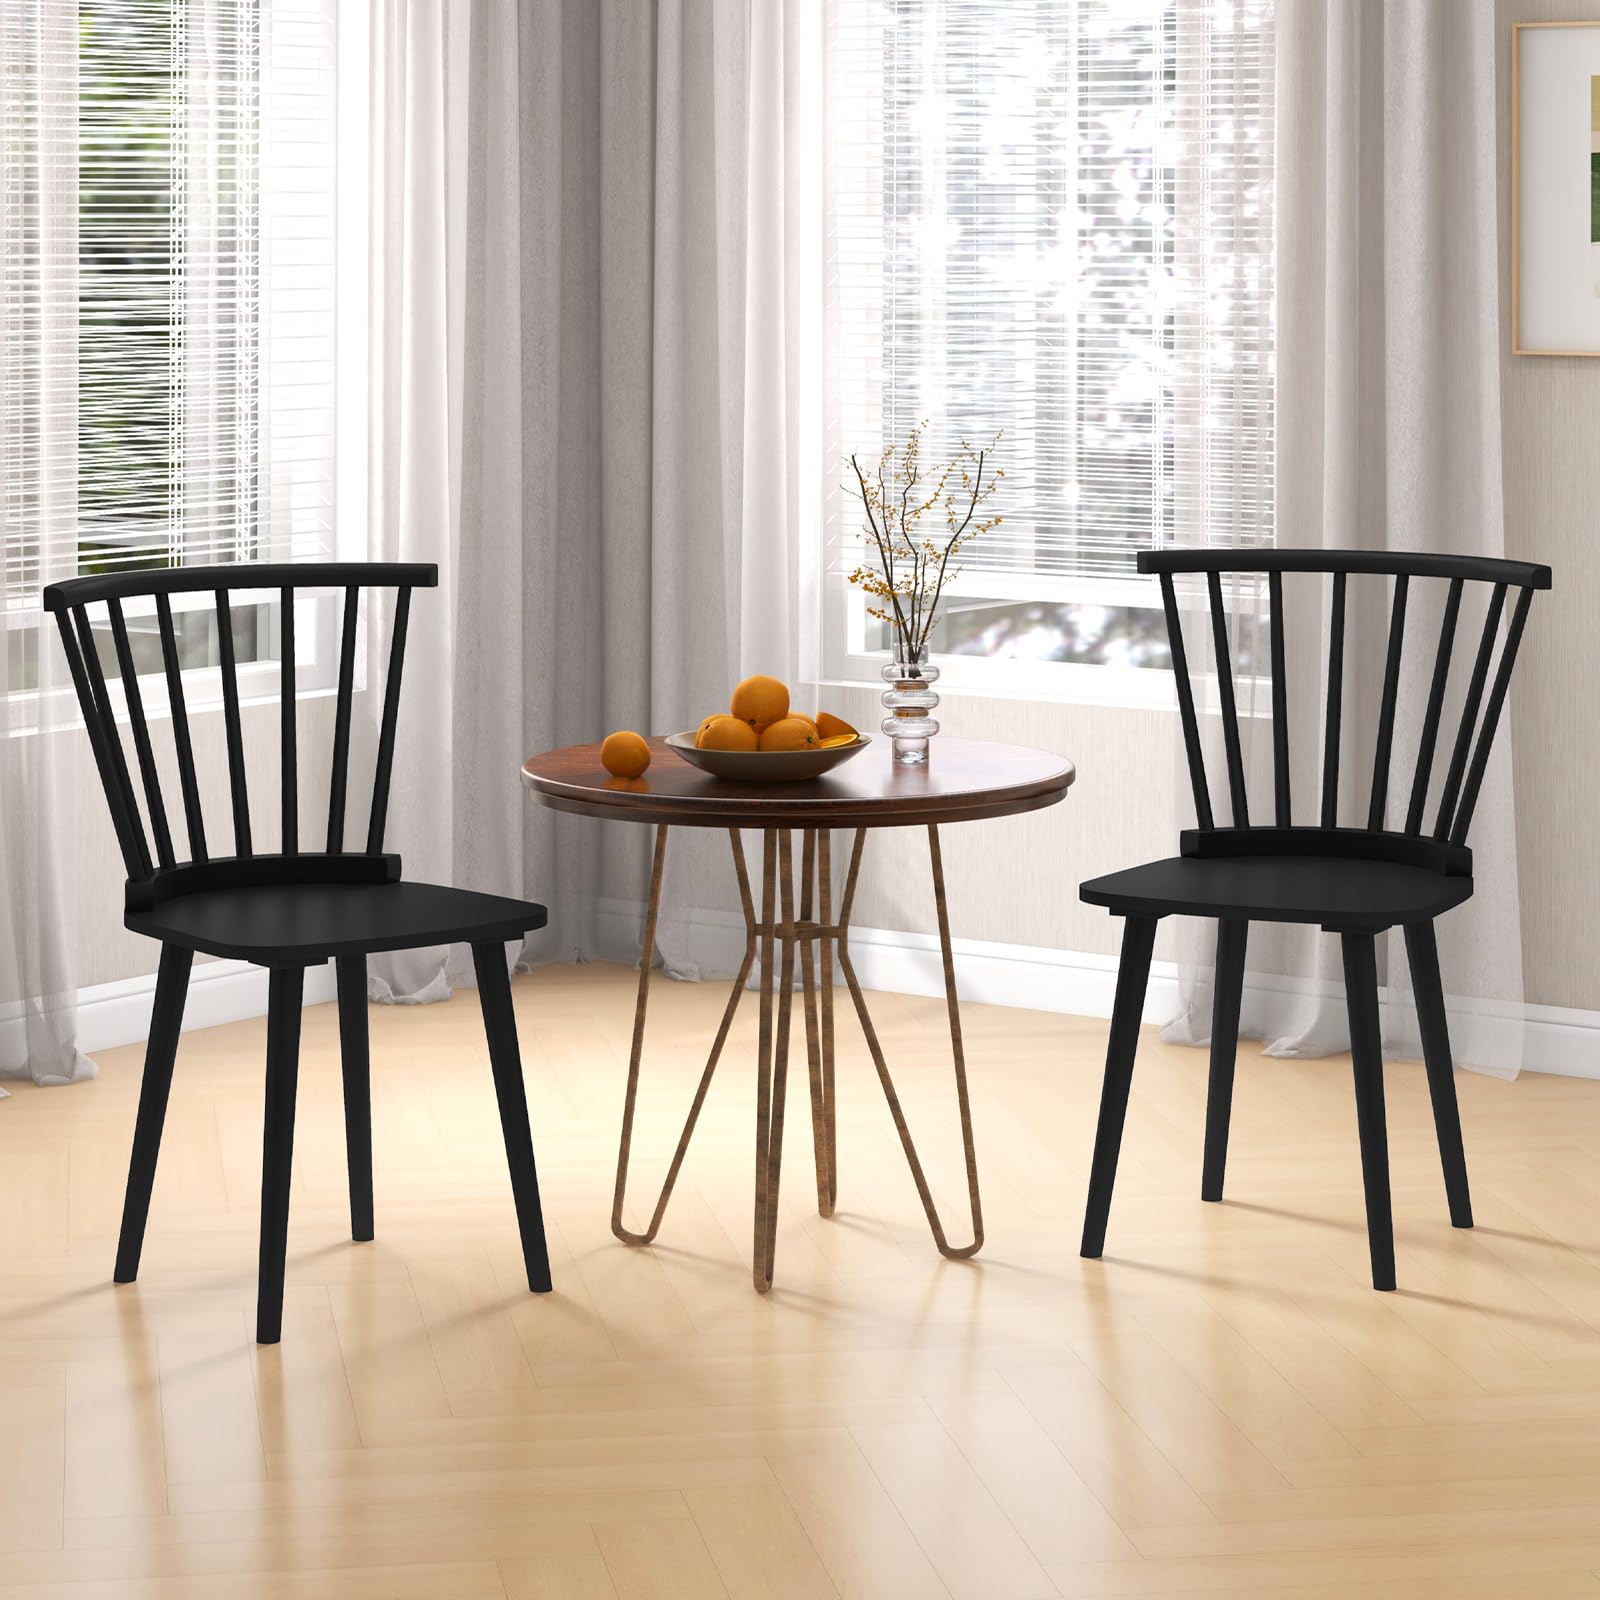 Giantex Wood Dining Chair, Windsor Dining Chairs